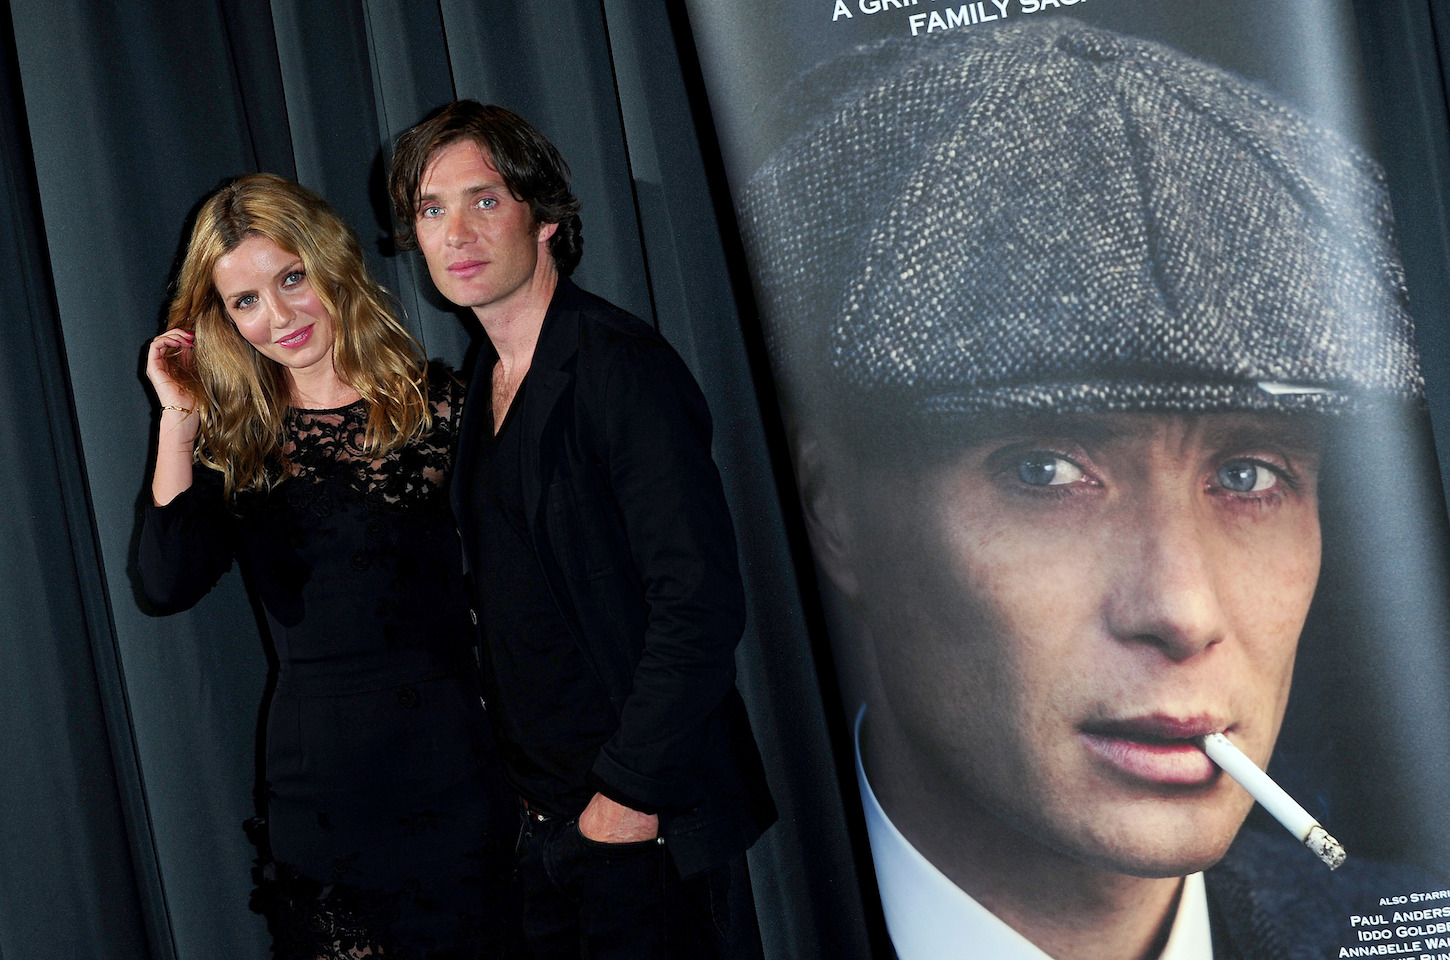 Cillian Murphy from 'Peaky Blinders' Season 6 standing next to fellow 'Peaky Blinders' cast member Annabelle Wallis with a poster of Thomas Shelby behind them